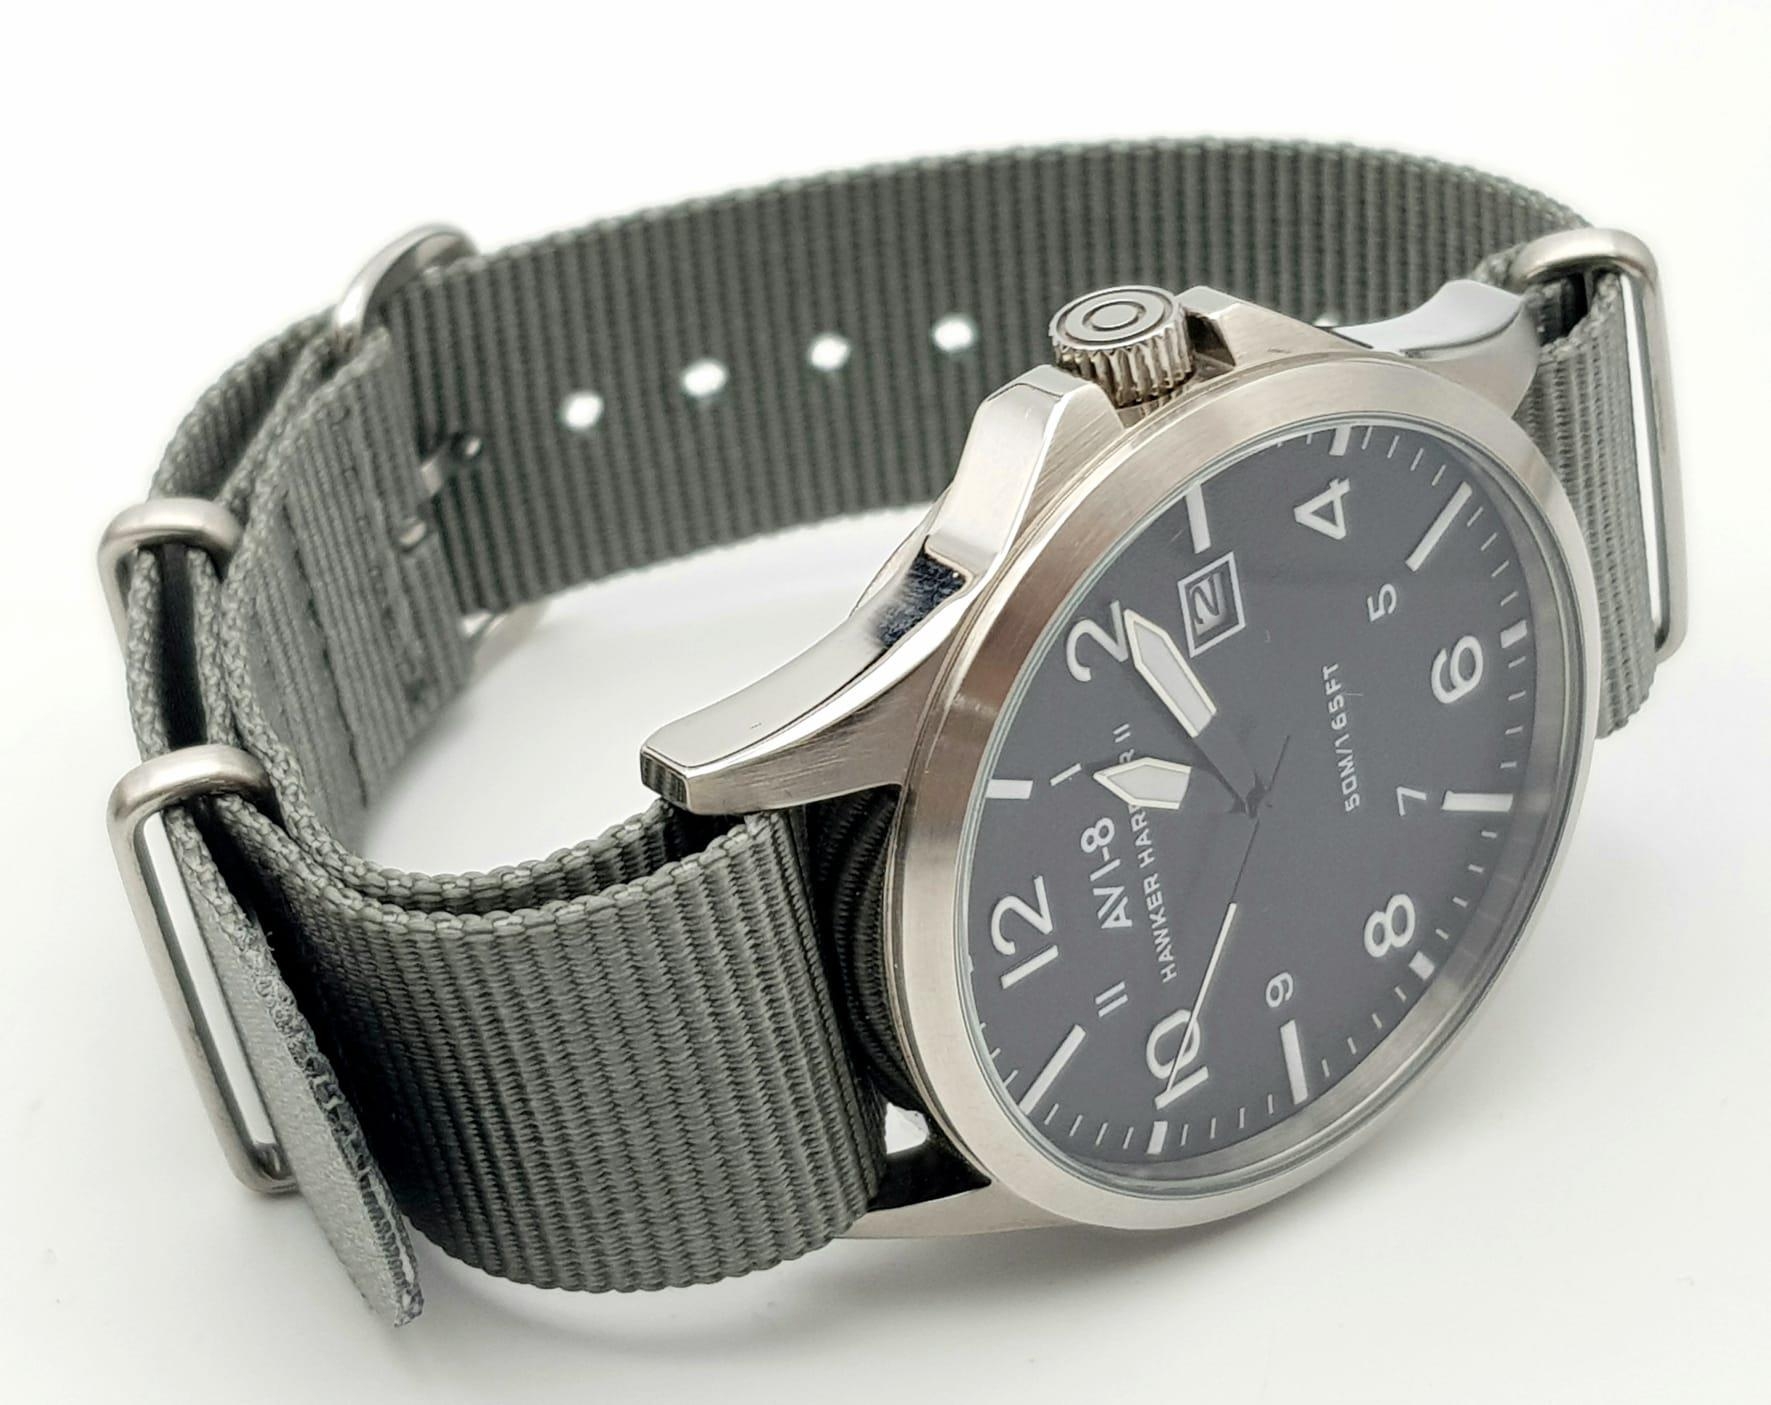 An Unworn Hawker Hurricane Quartz Date Watch by AVI8. 46mm Including Crown. Full Working order on - Image 3 of 7